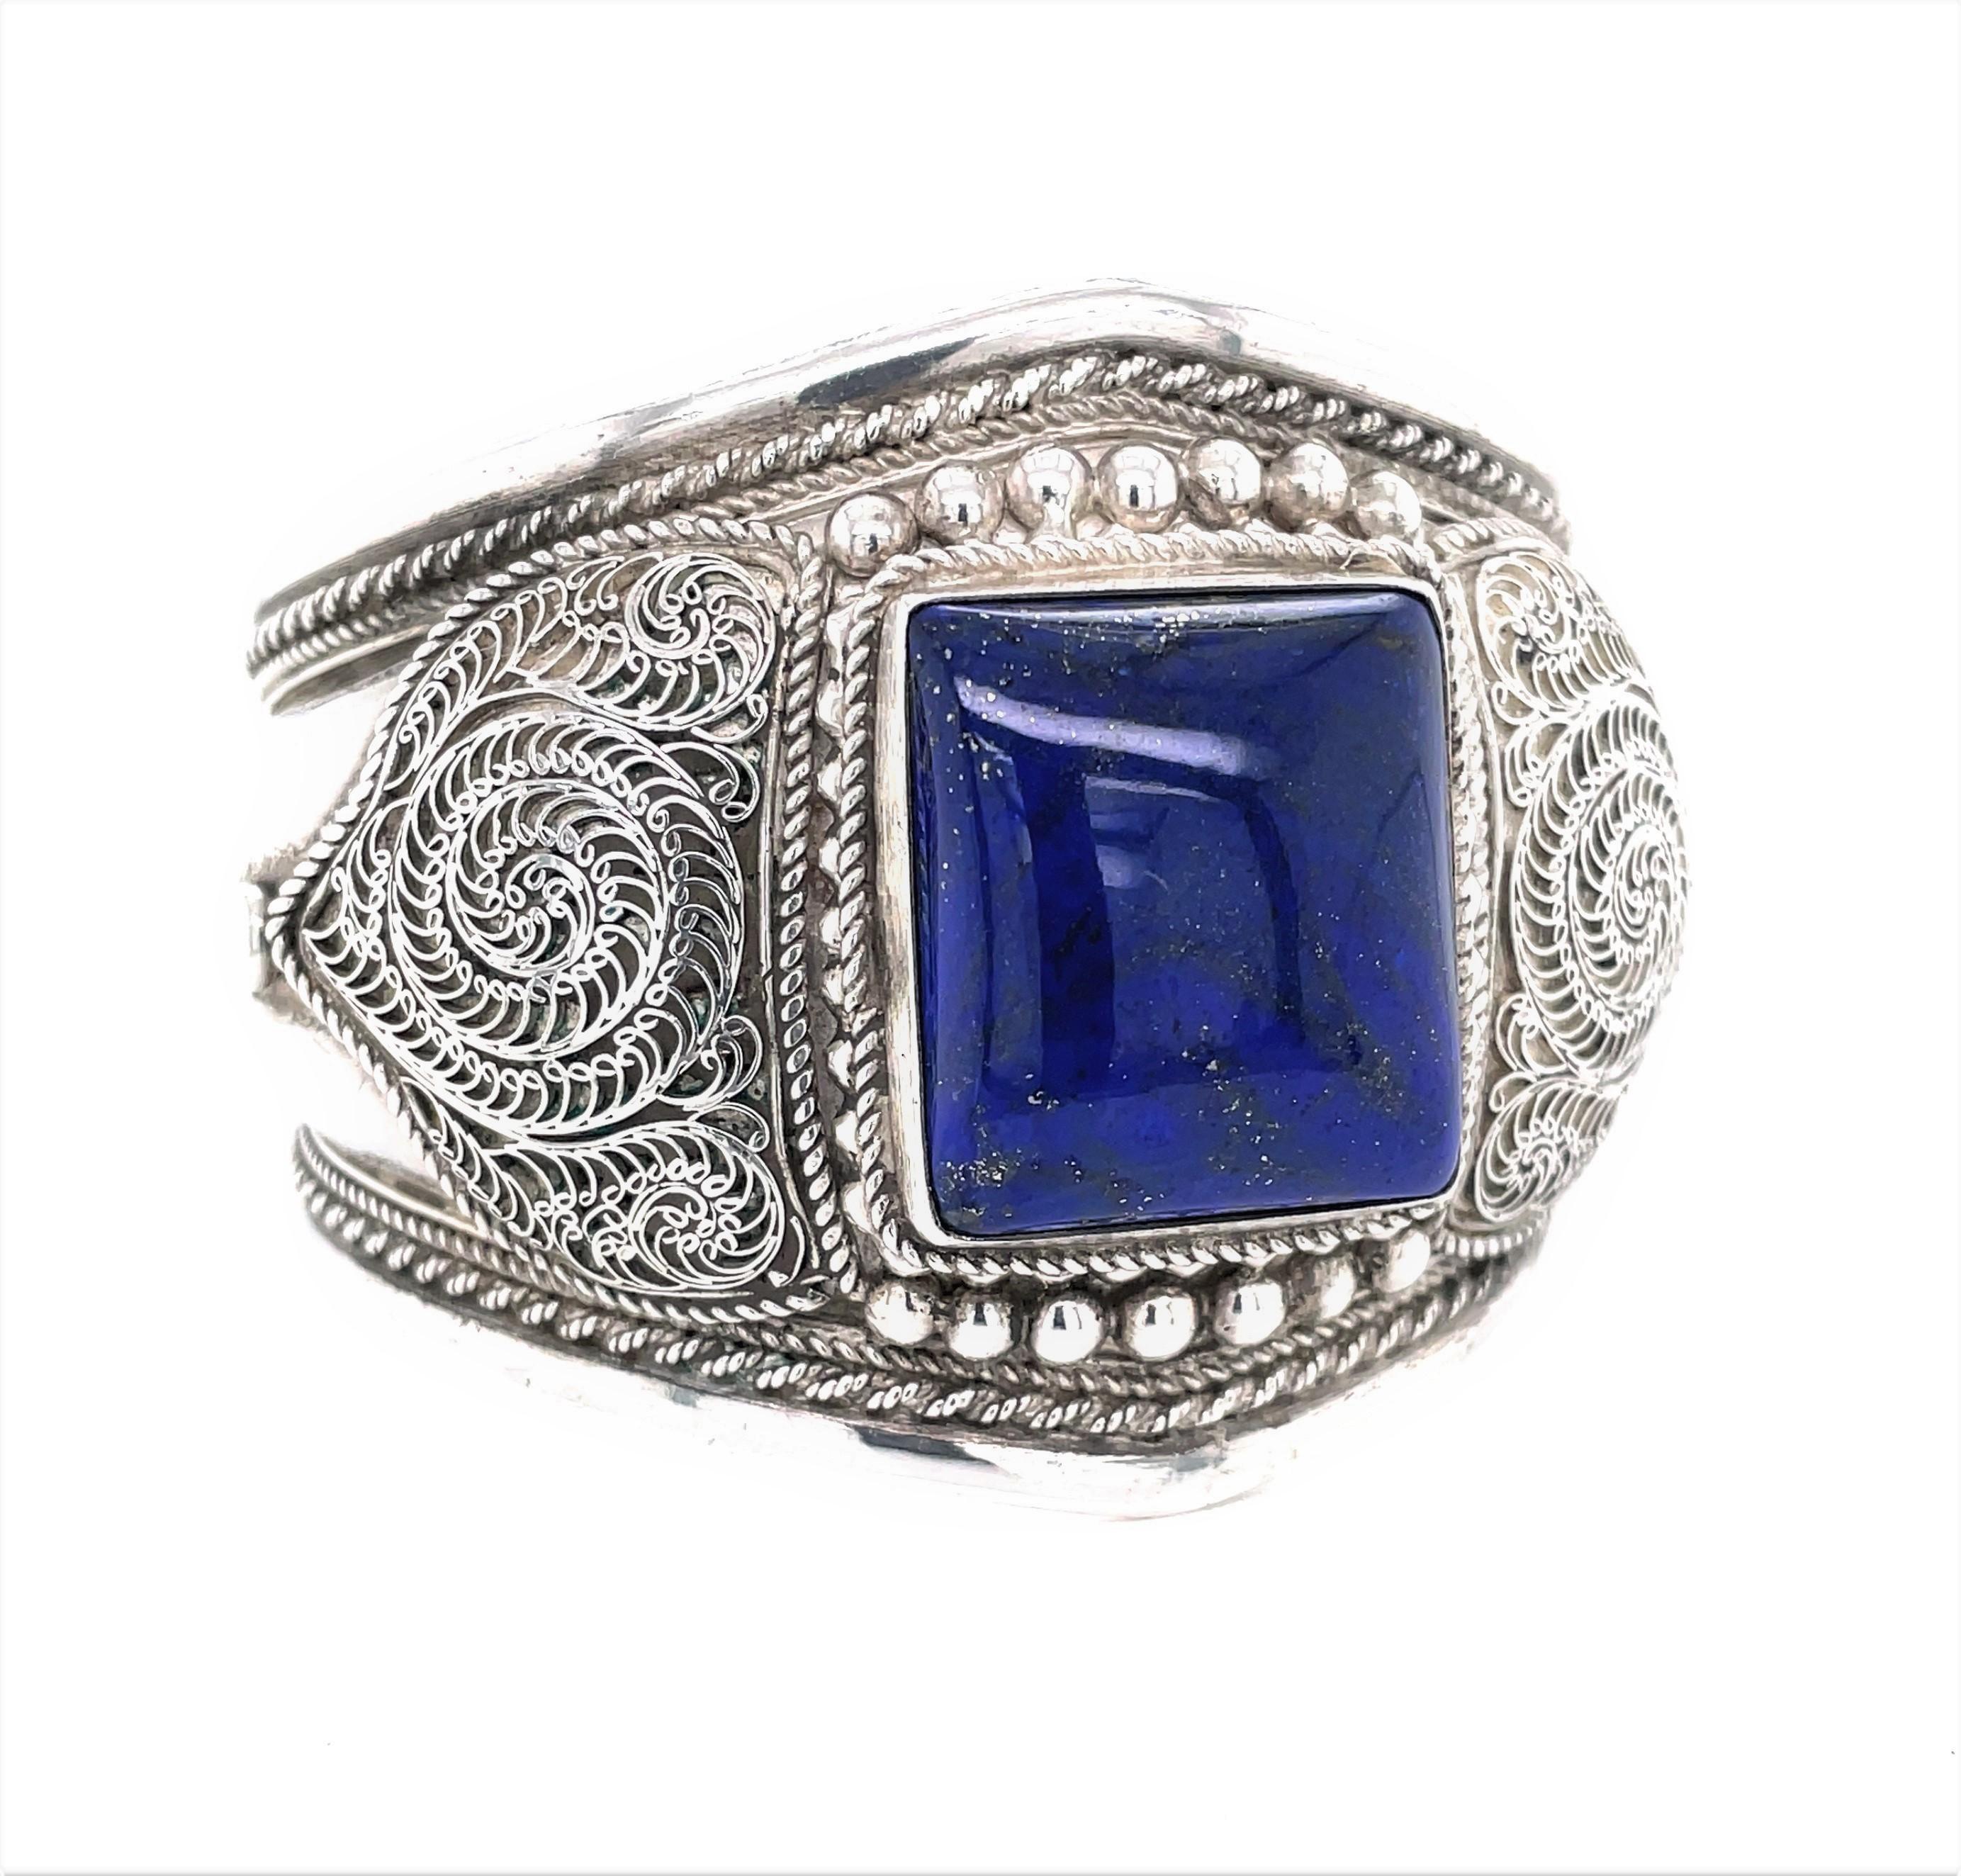 Blue Lapis Artisan Silver Wide Cuff Statement Bracelet In Excellent Condition For Sale In Mount Kisco, NY